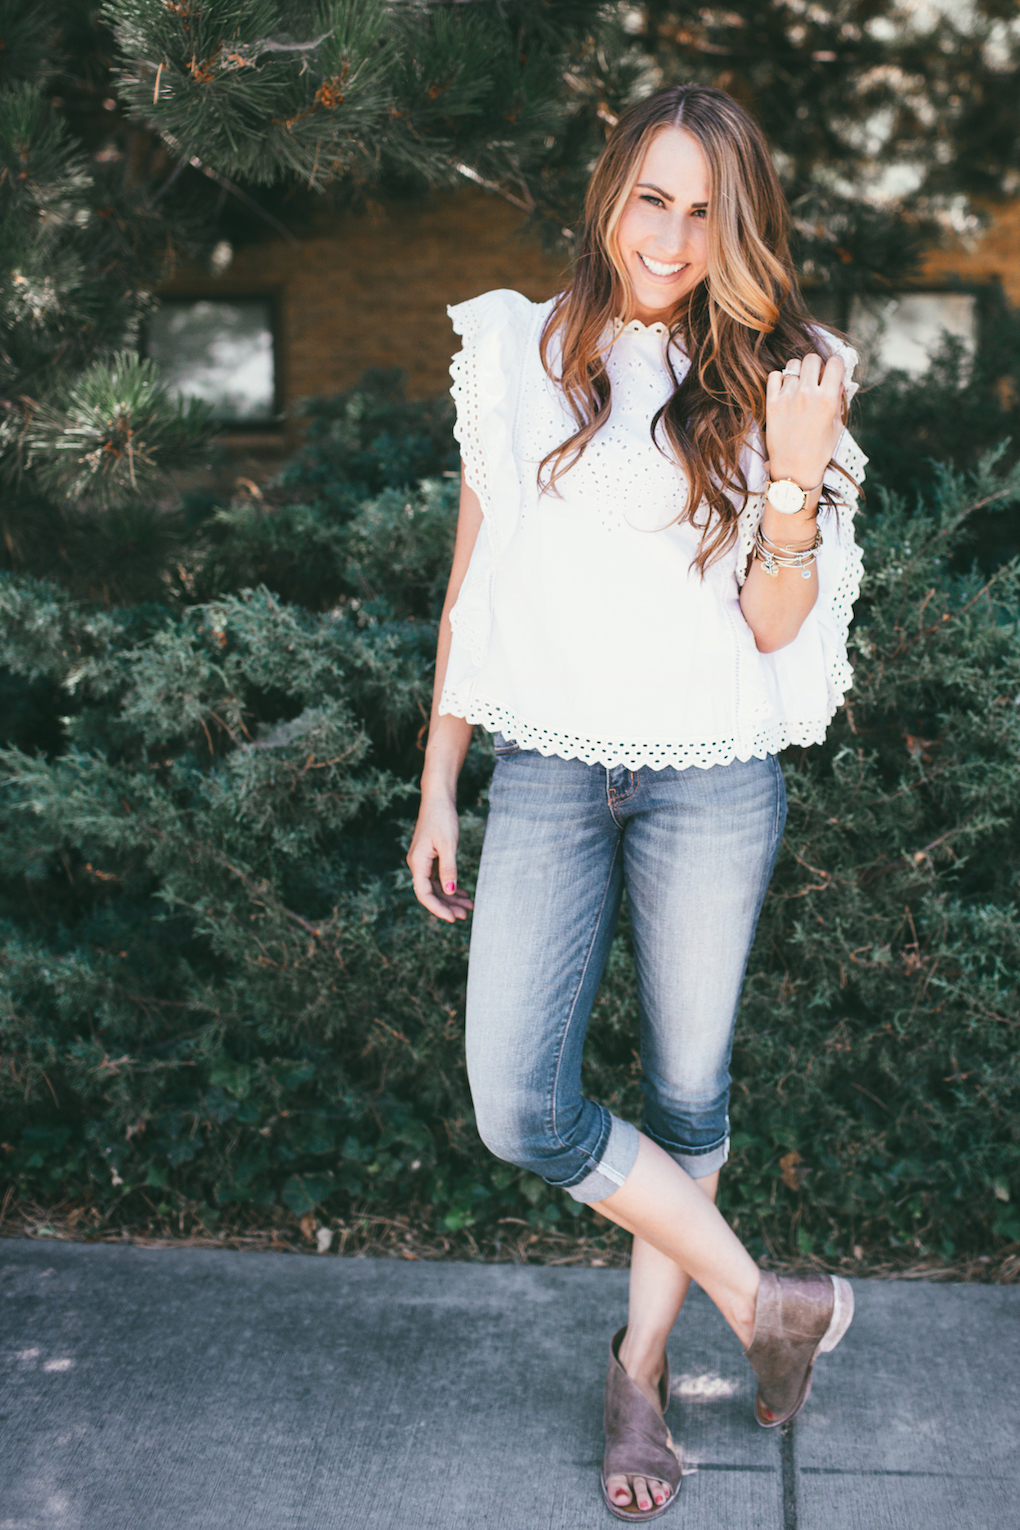 Girl in white eyelet top with crops on with watch and bracelets